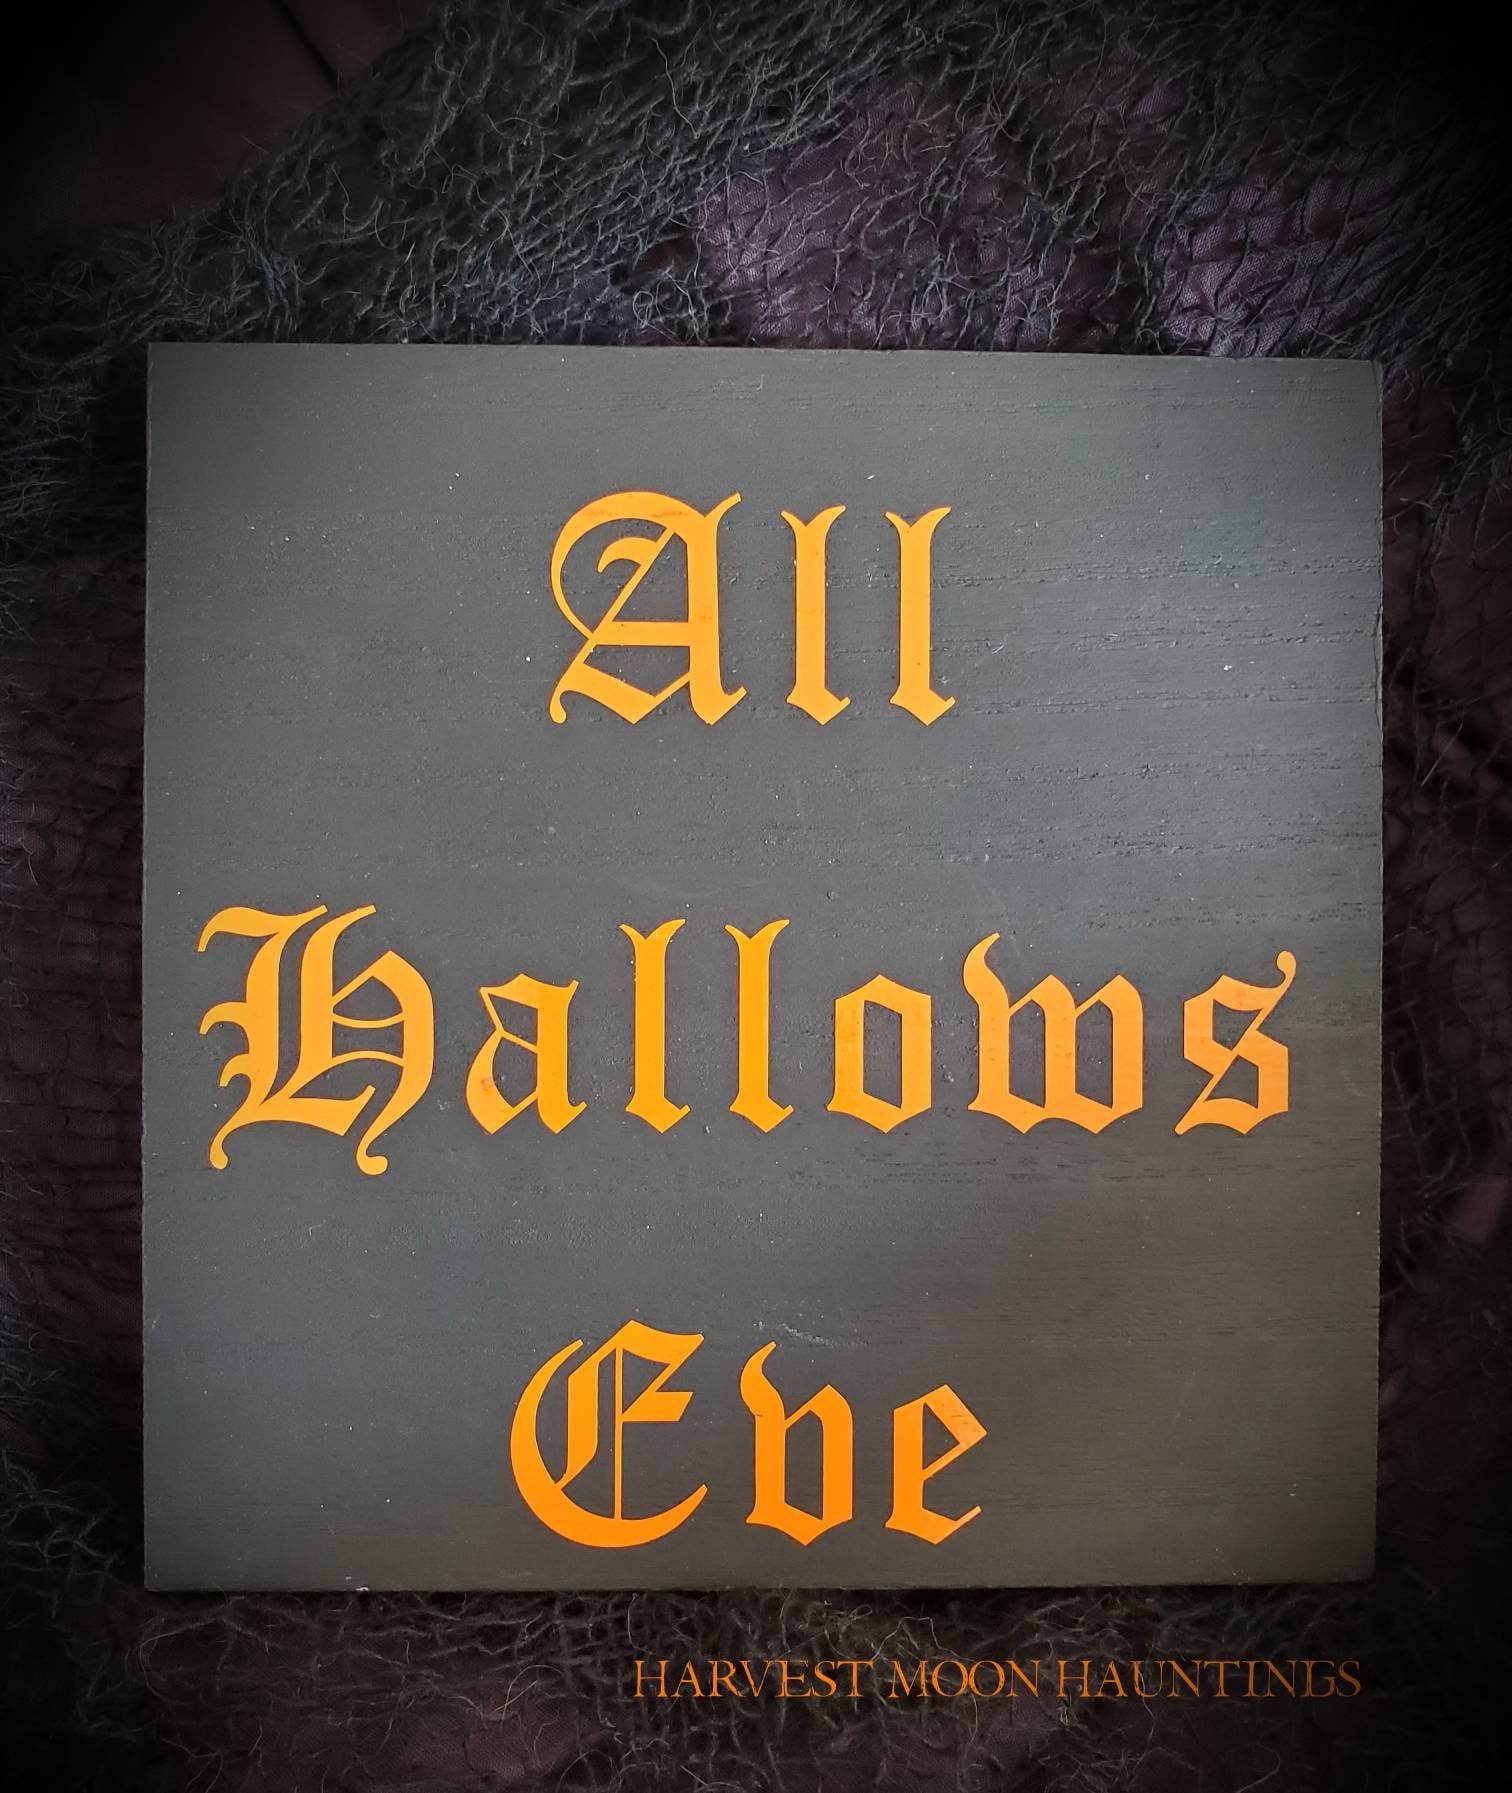 All Hallows' Eve Banner - Party Connexion LLC